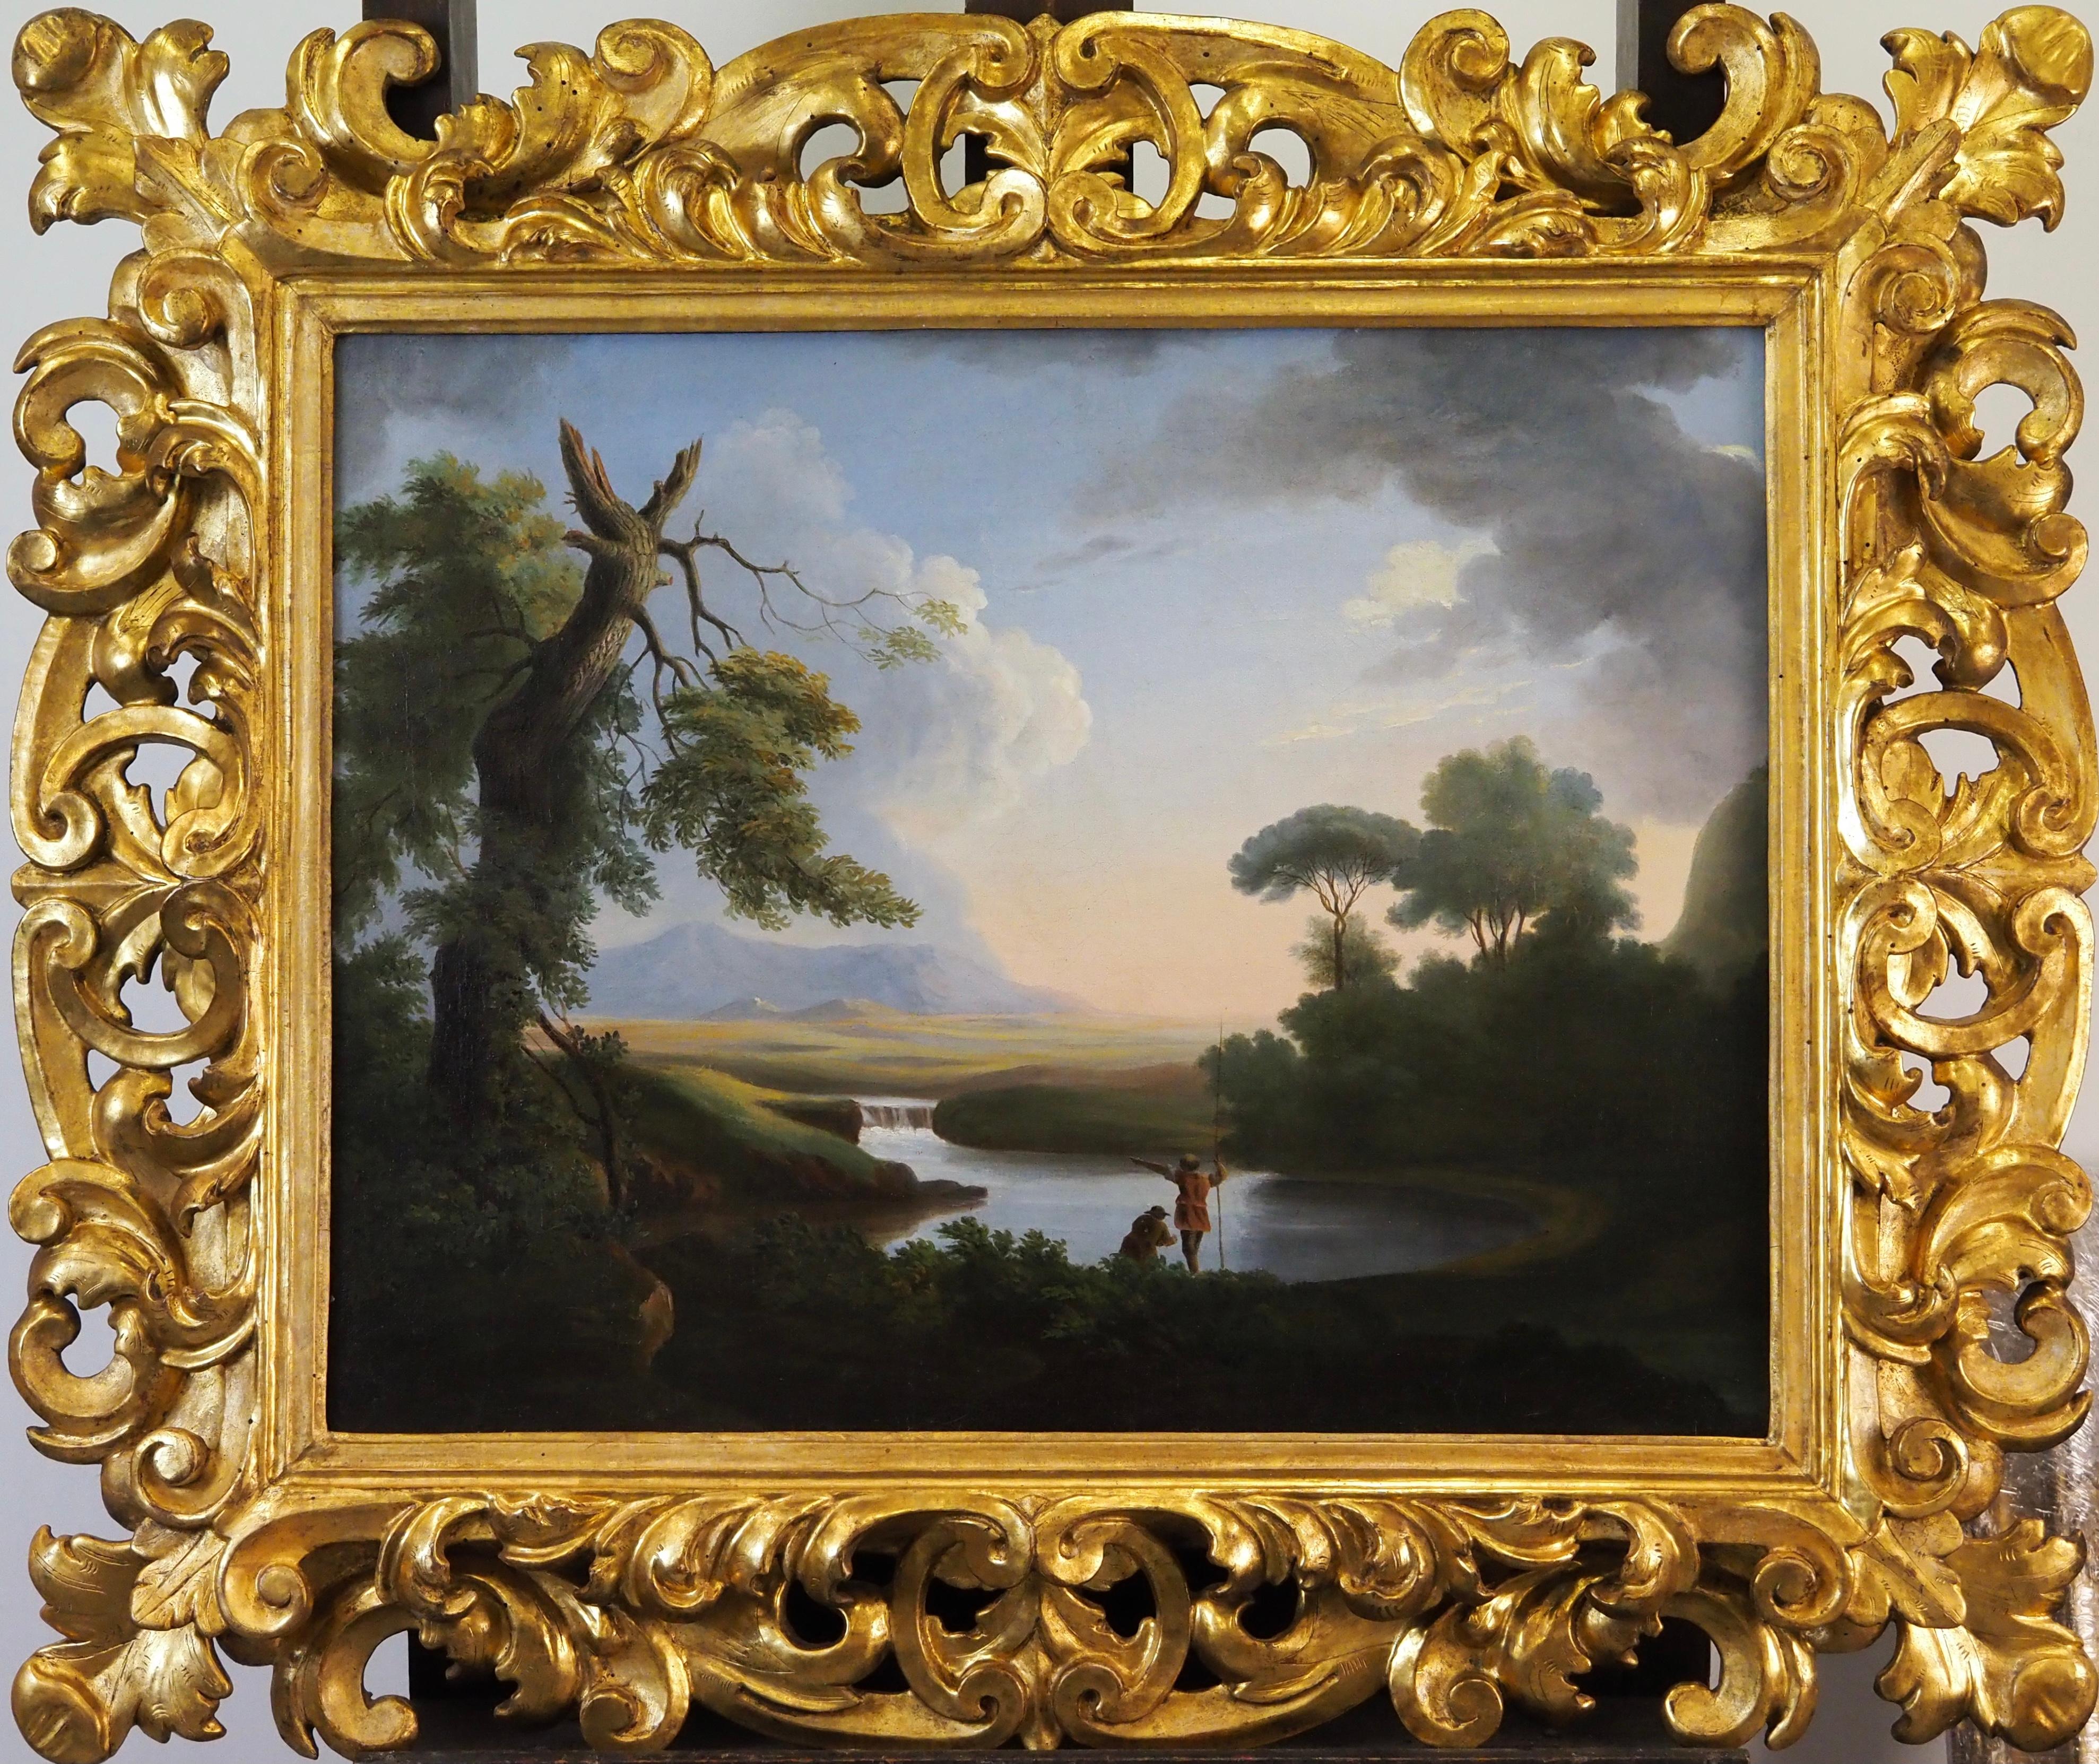 A classical Italianate landscape with figures by a river